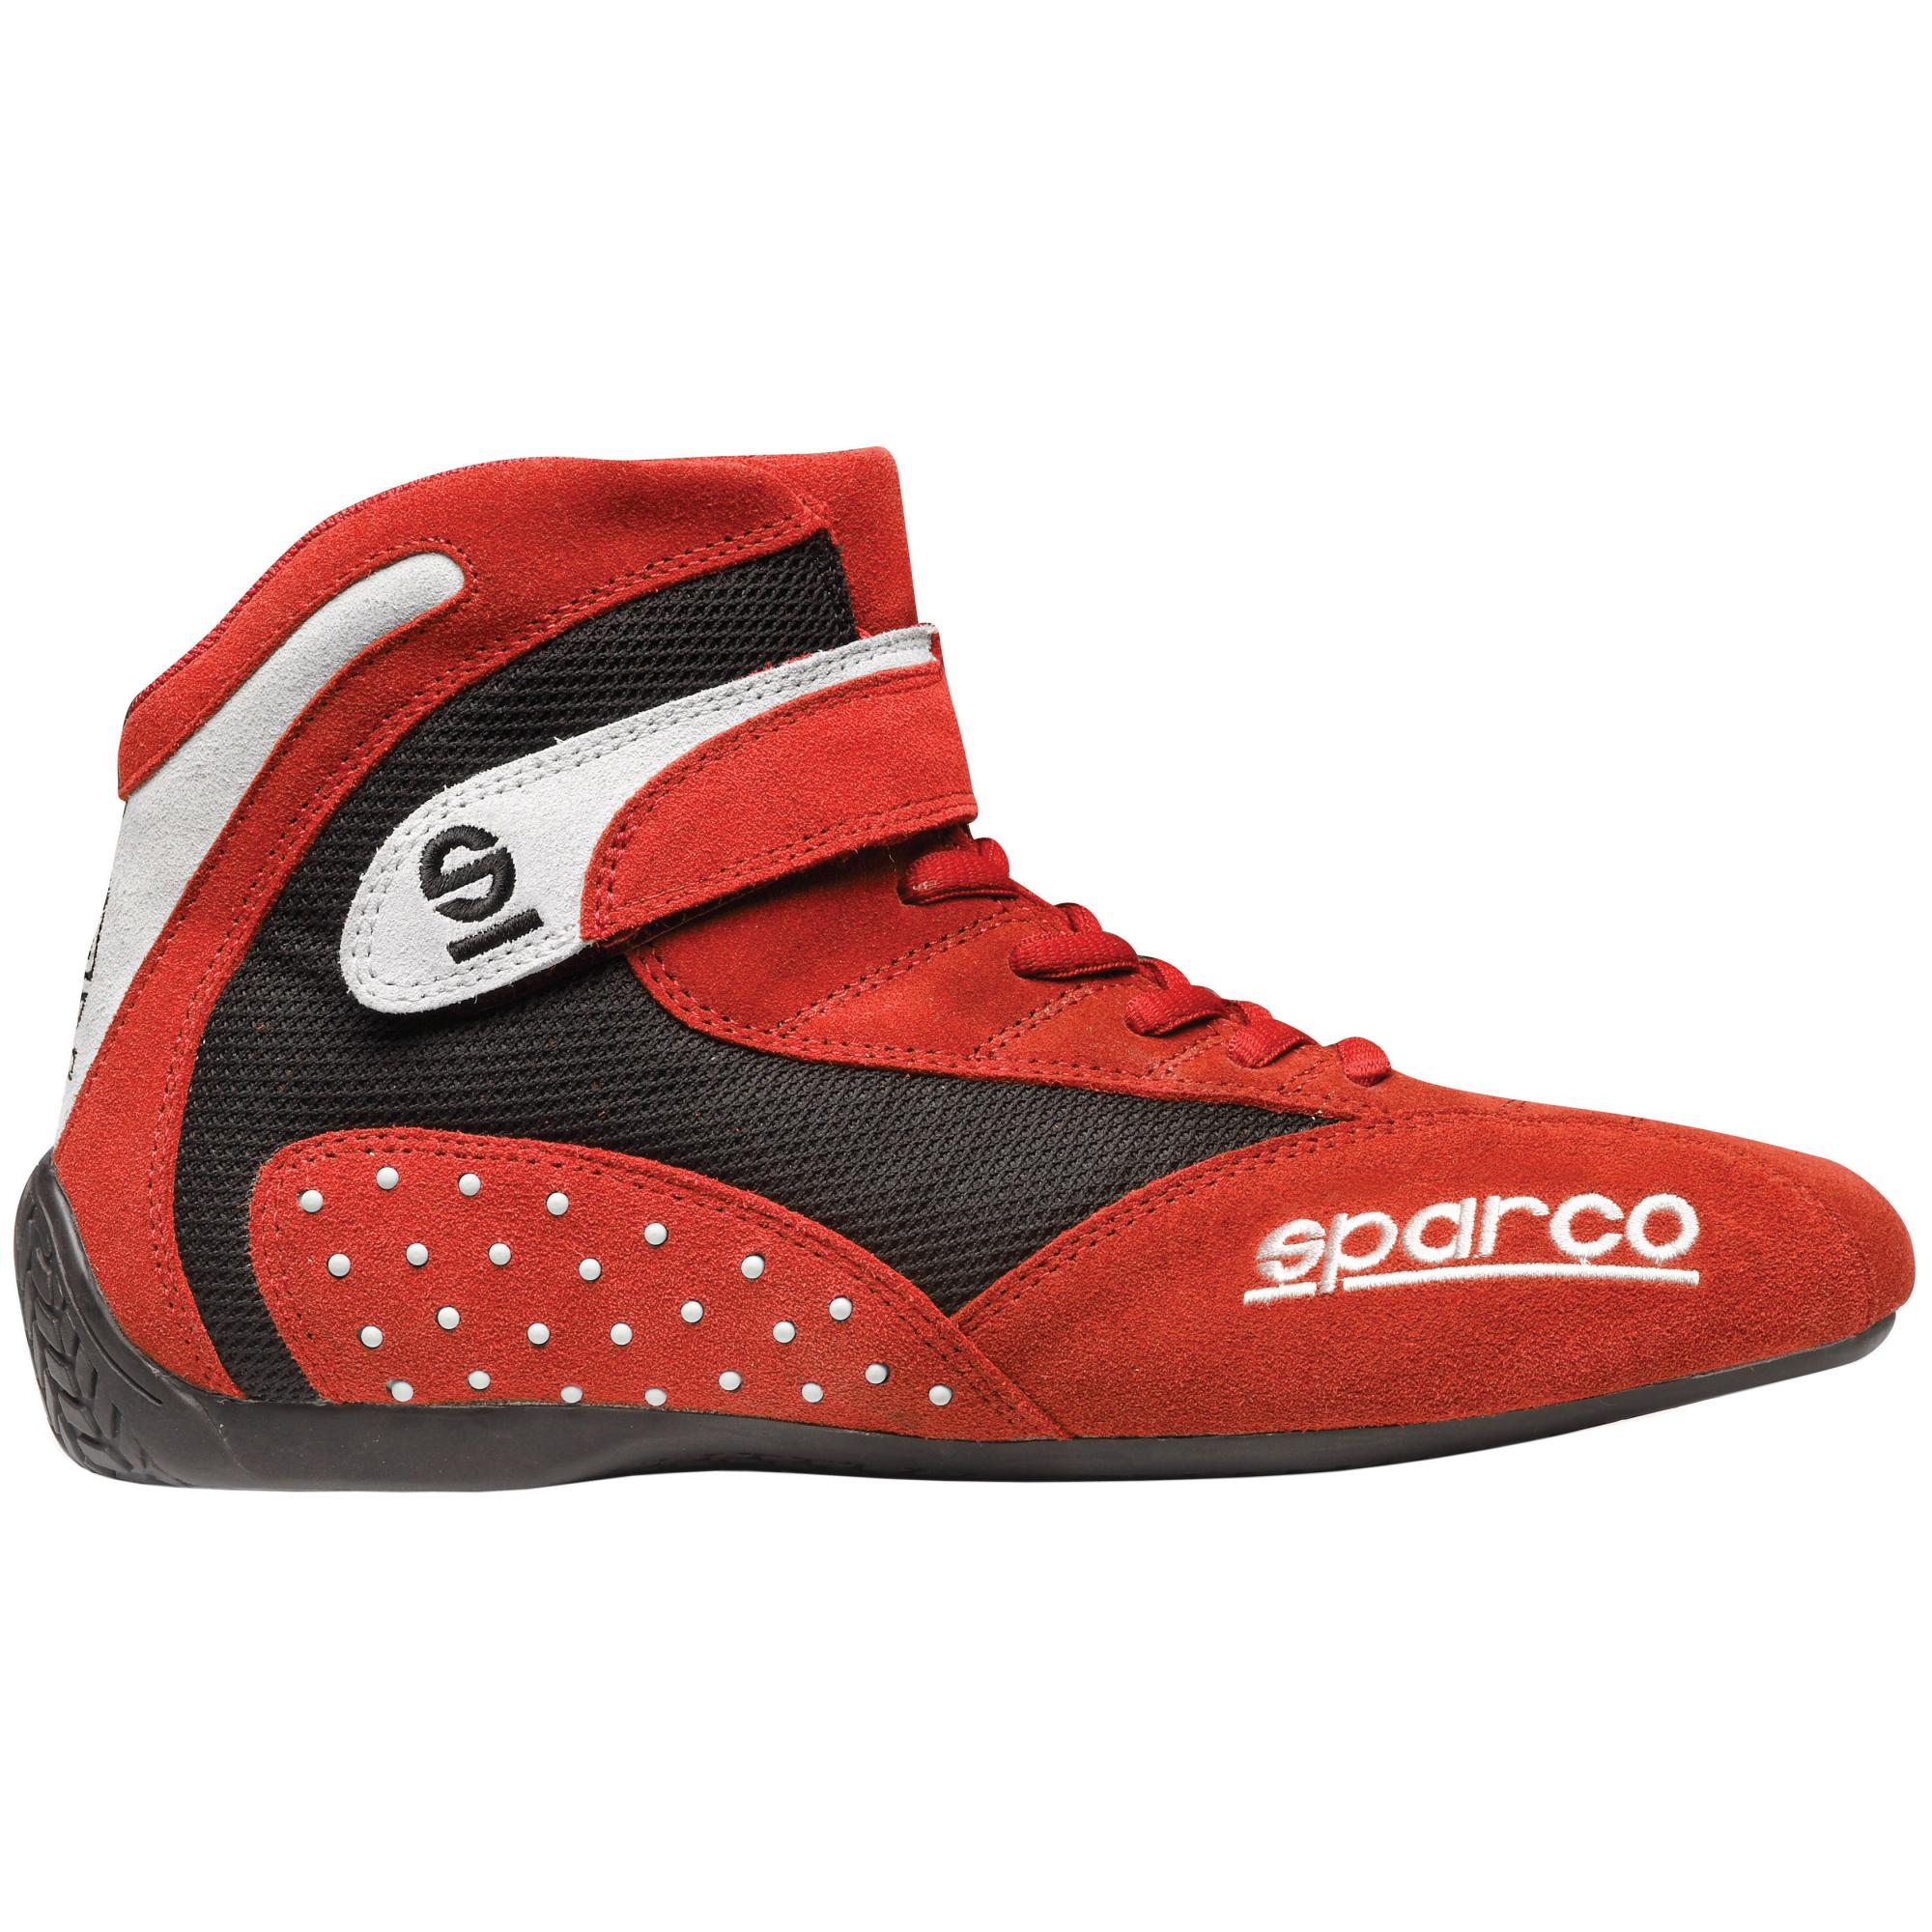 Sparco K-Mid3 Kart Boots in Red from Merlin Motorsport